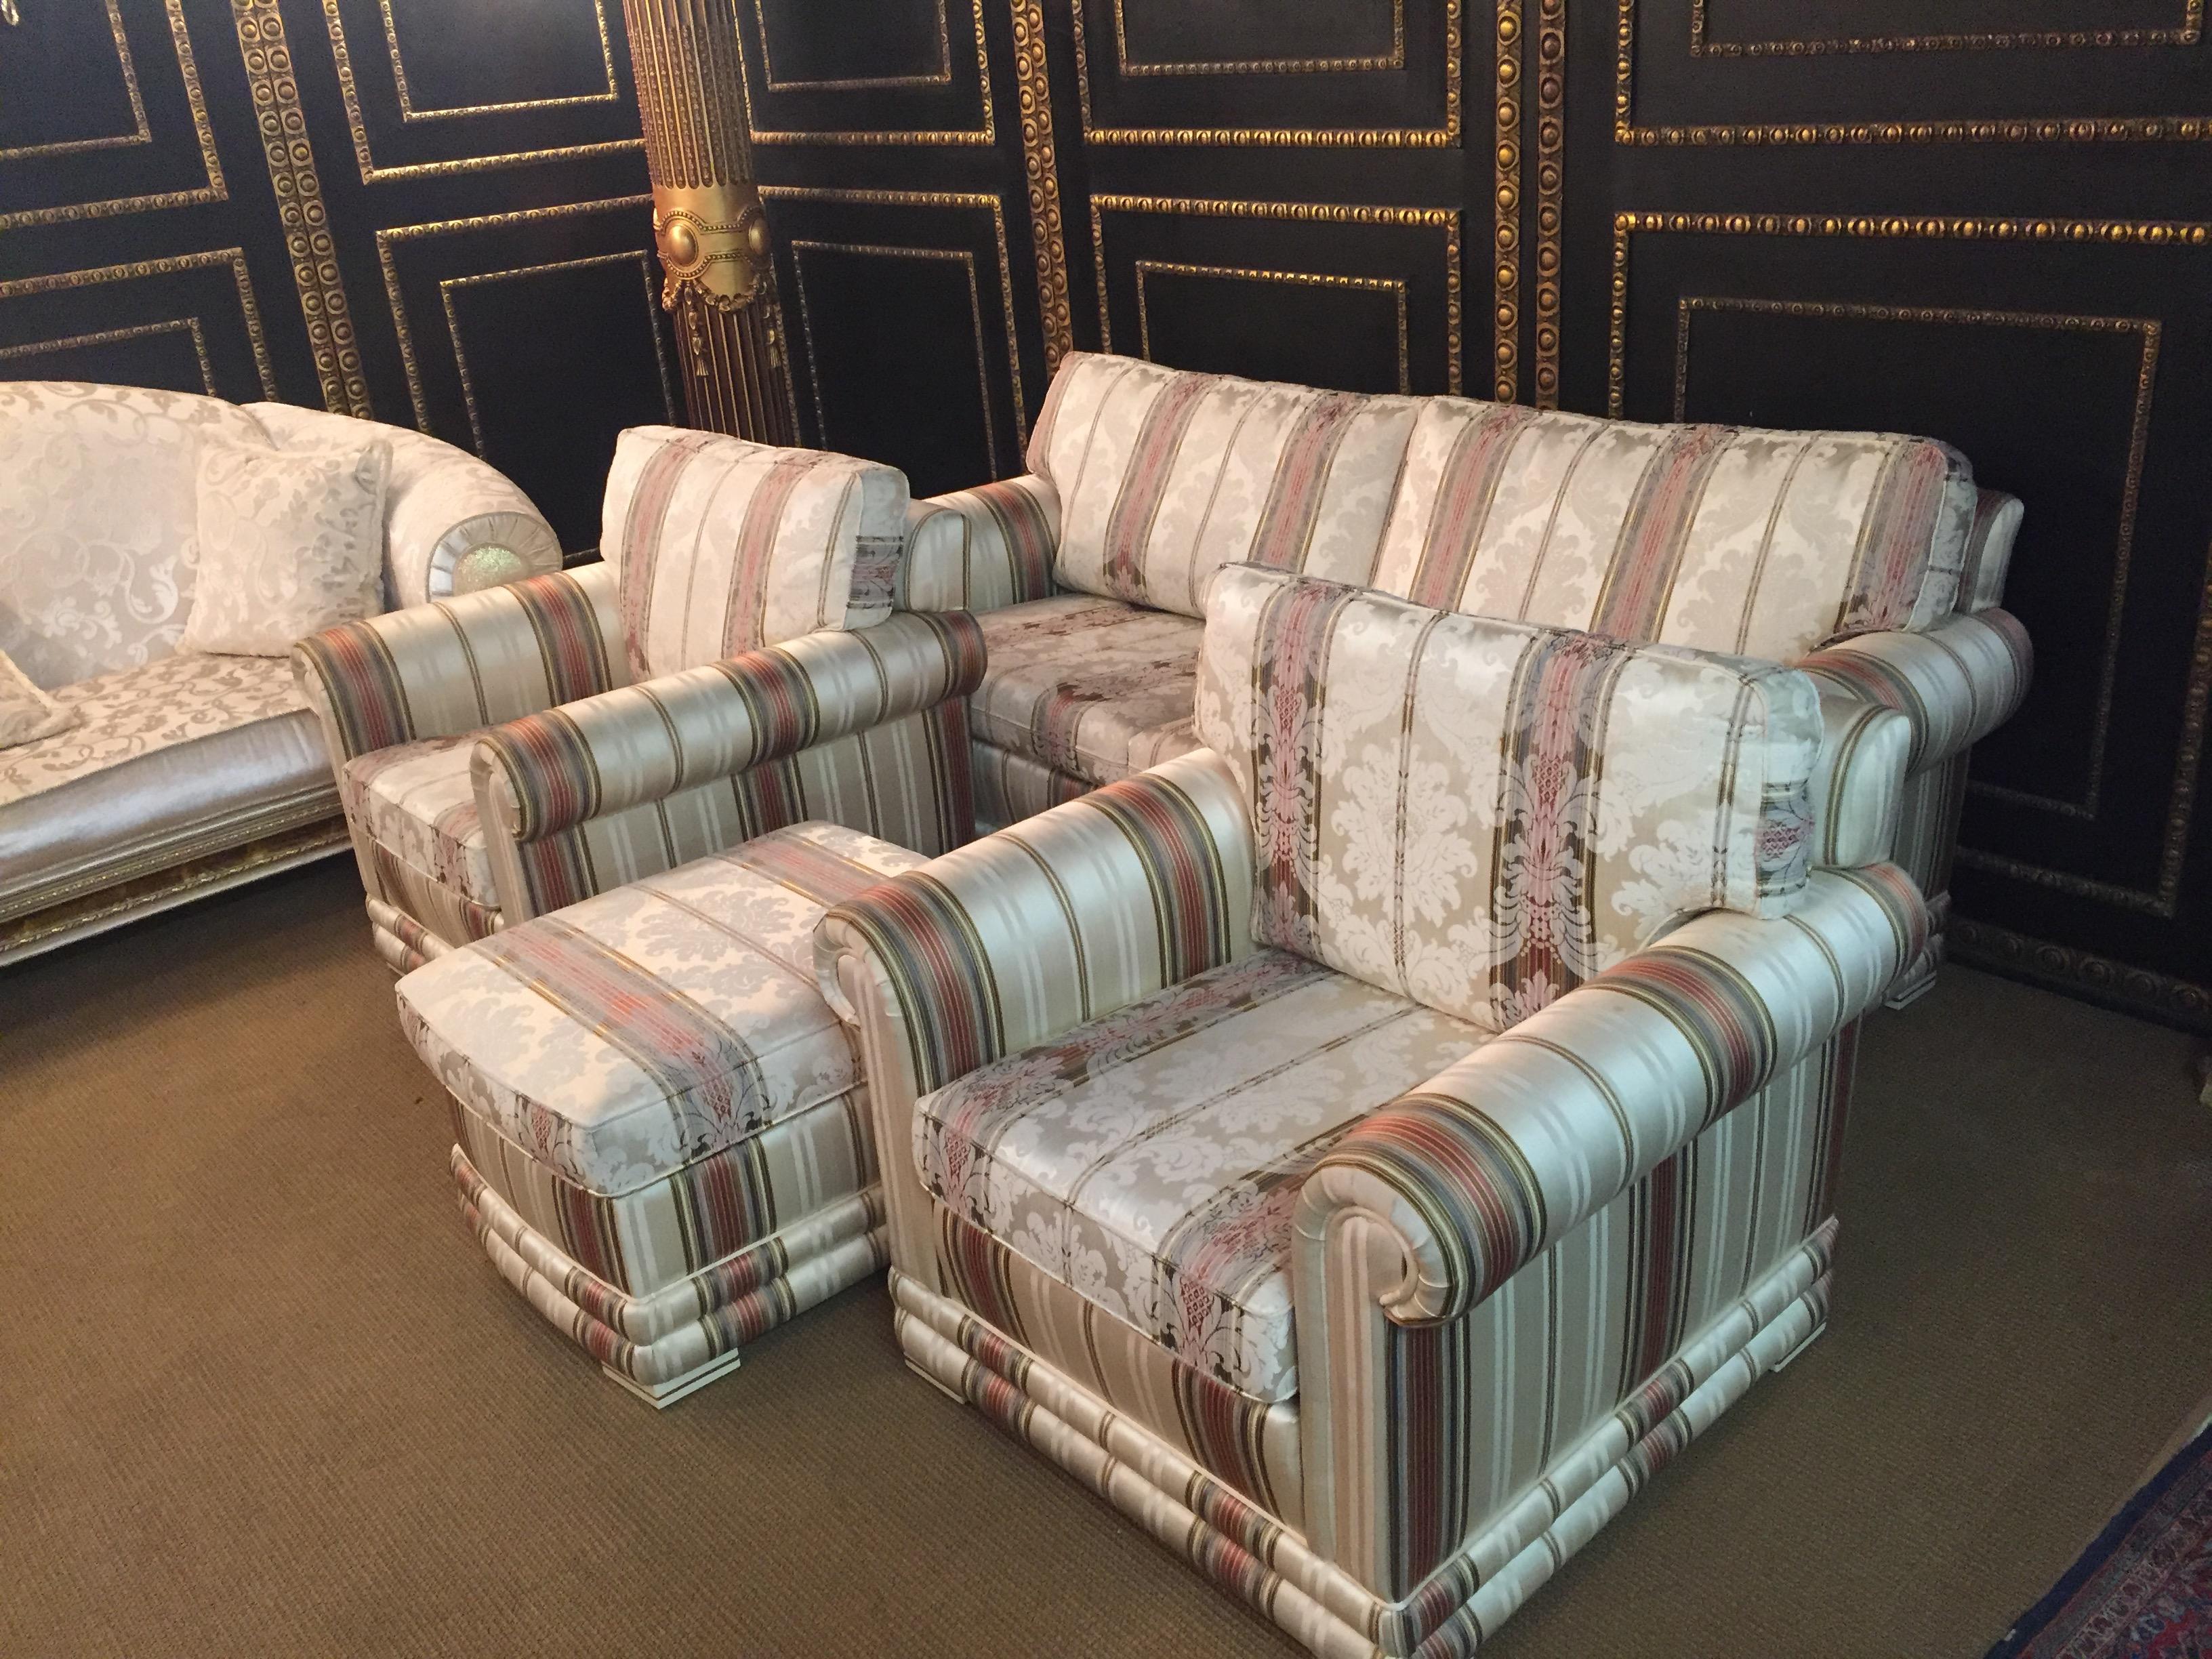 Very beautiful and noble set in Biedermeier style.

The set is covered with 2 different satin fabrics.
The armchairs have metal castor.